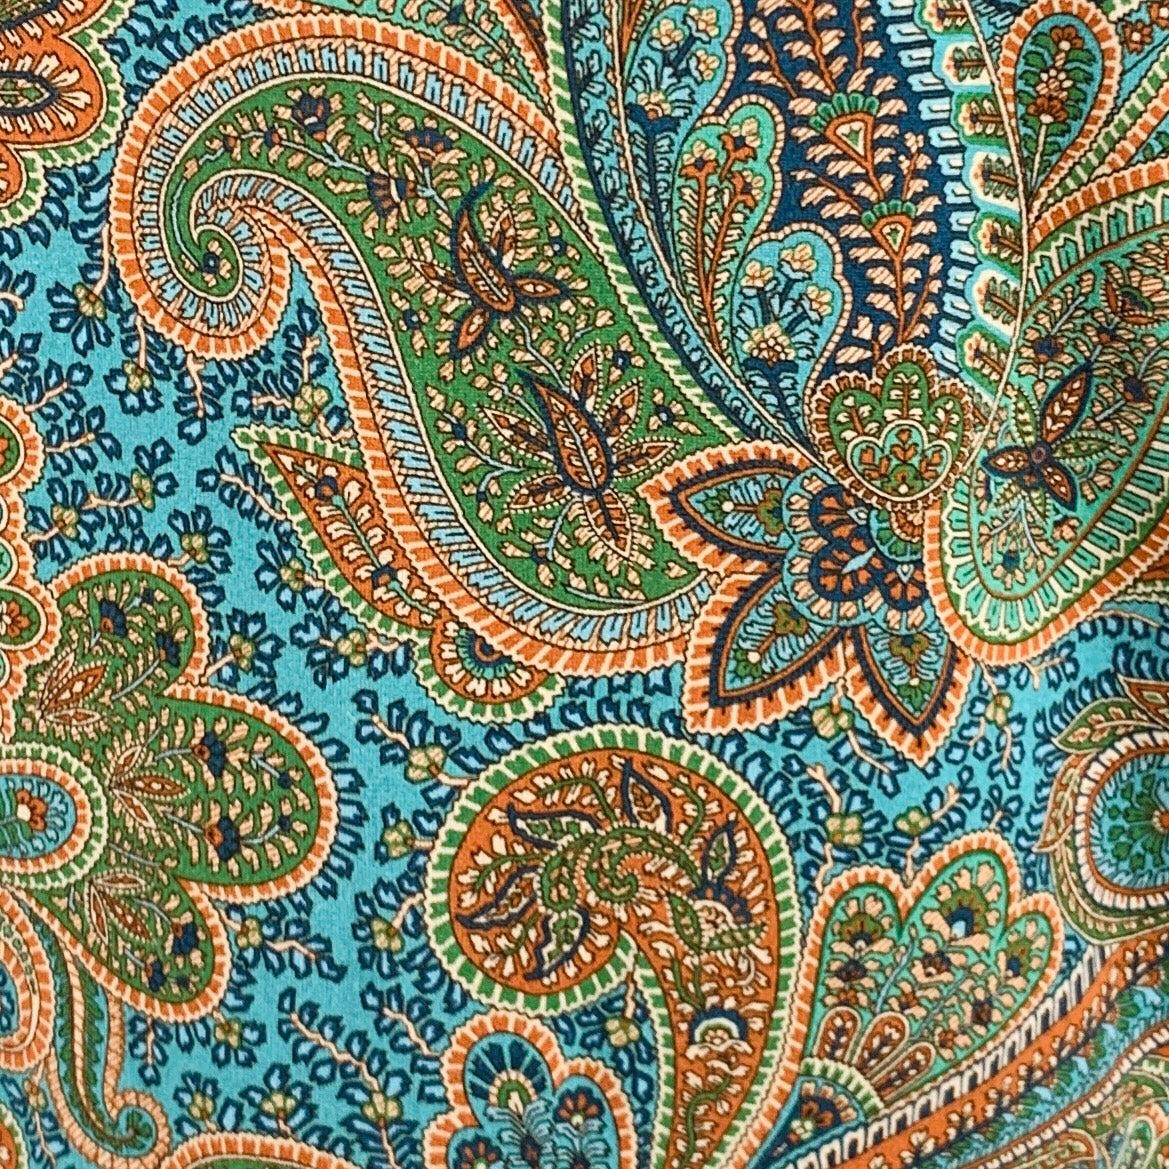 ETRO t-shirt
in a blue and orange cotton fabric featuring a paisley pattern, short sleeves, and crew neck. Made in Italy.Excellent Pre-Owned Condition. 

Marked:   S 

Measurements: 
 
Shoulder: 19.5 inches Chest: 39 inches Sleeve: 7 inches Length: